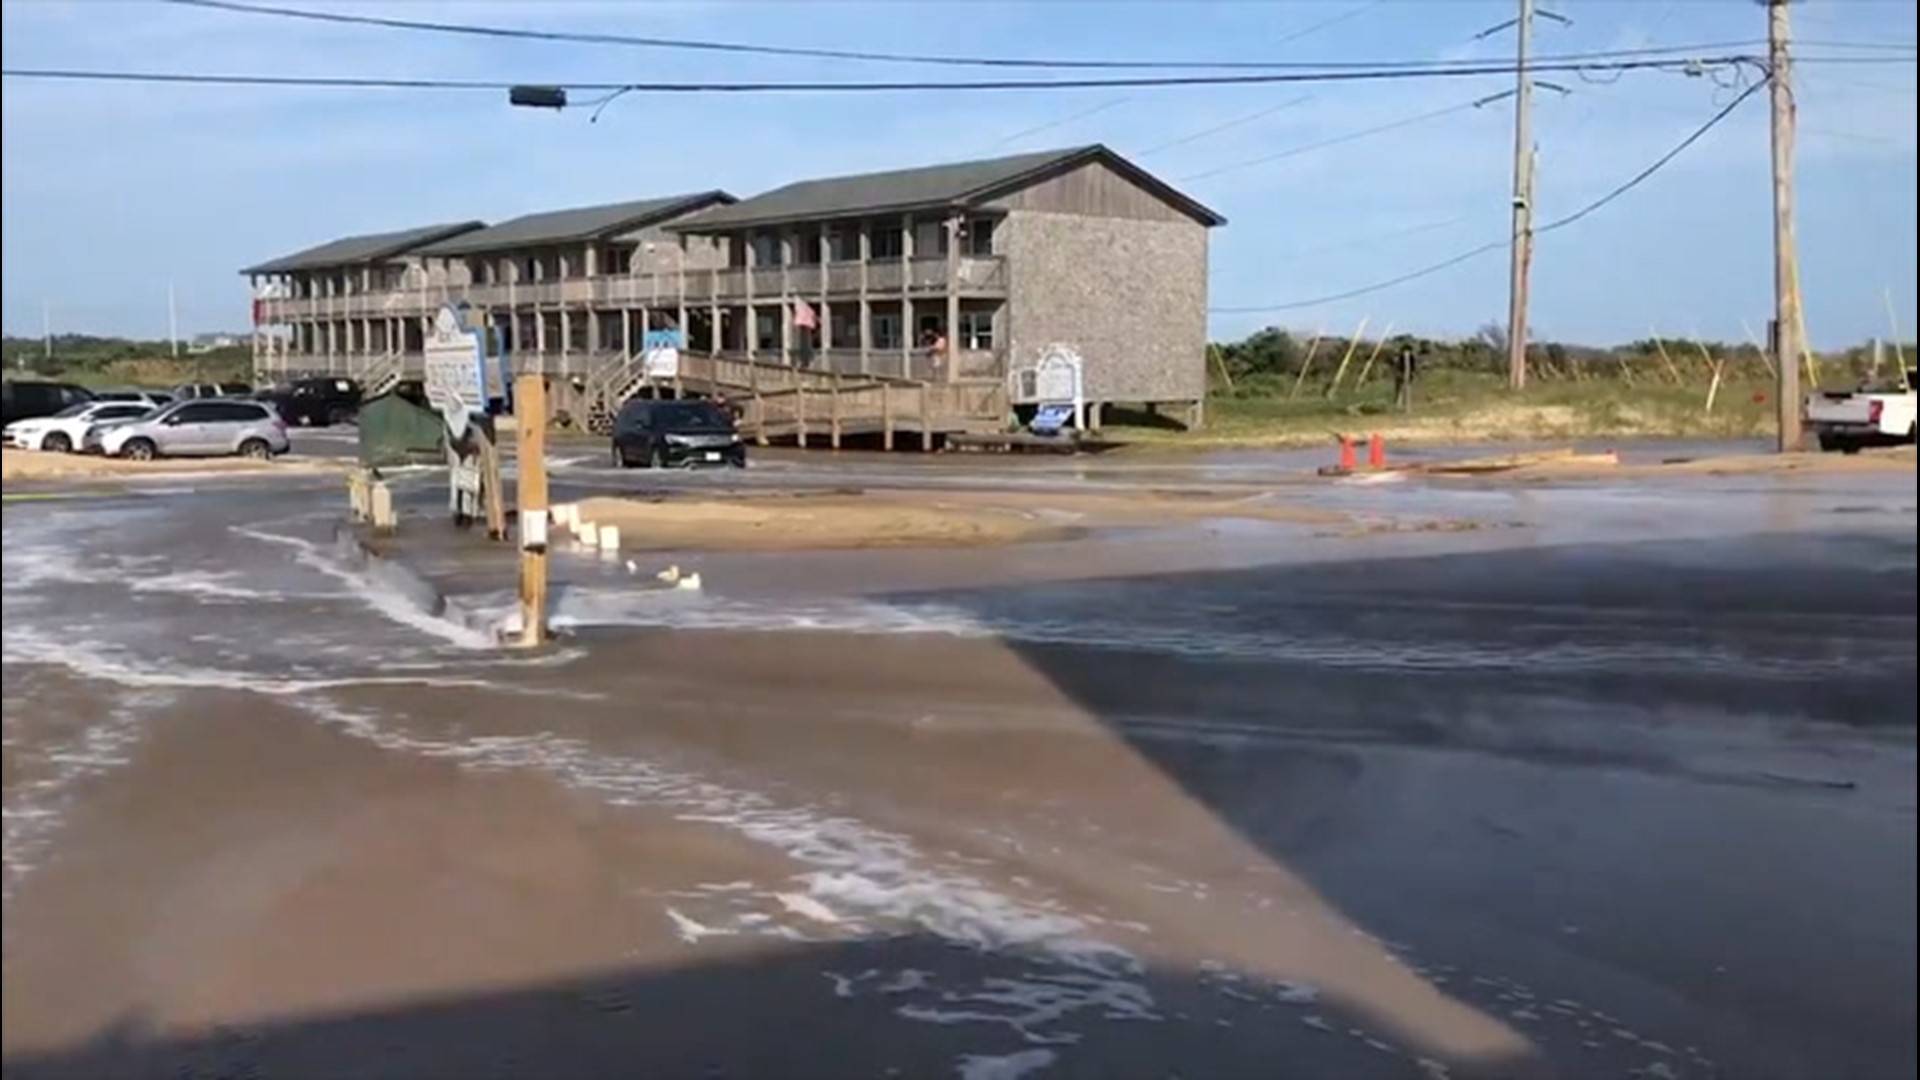 The streets of Buxton, North Carolina, were flooded thanks to a distant Hurricane Teddy on Saturday, Sept. 20.